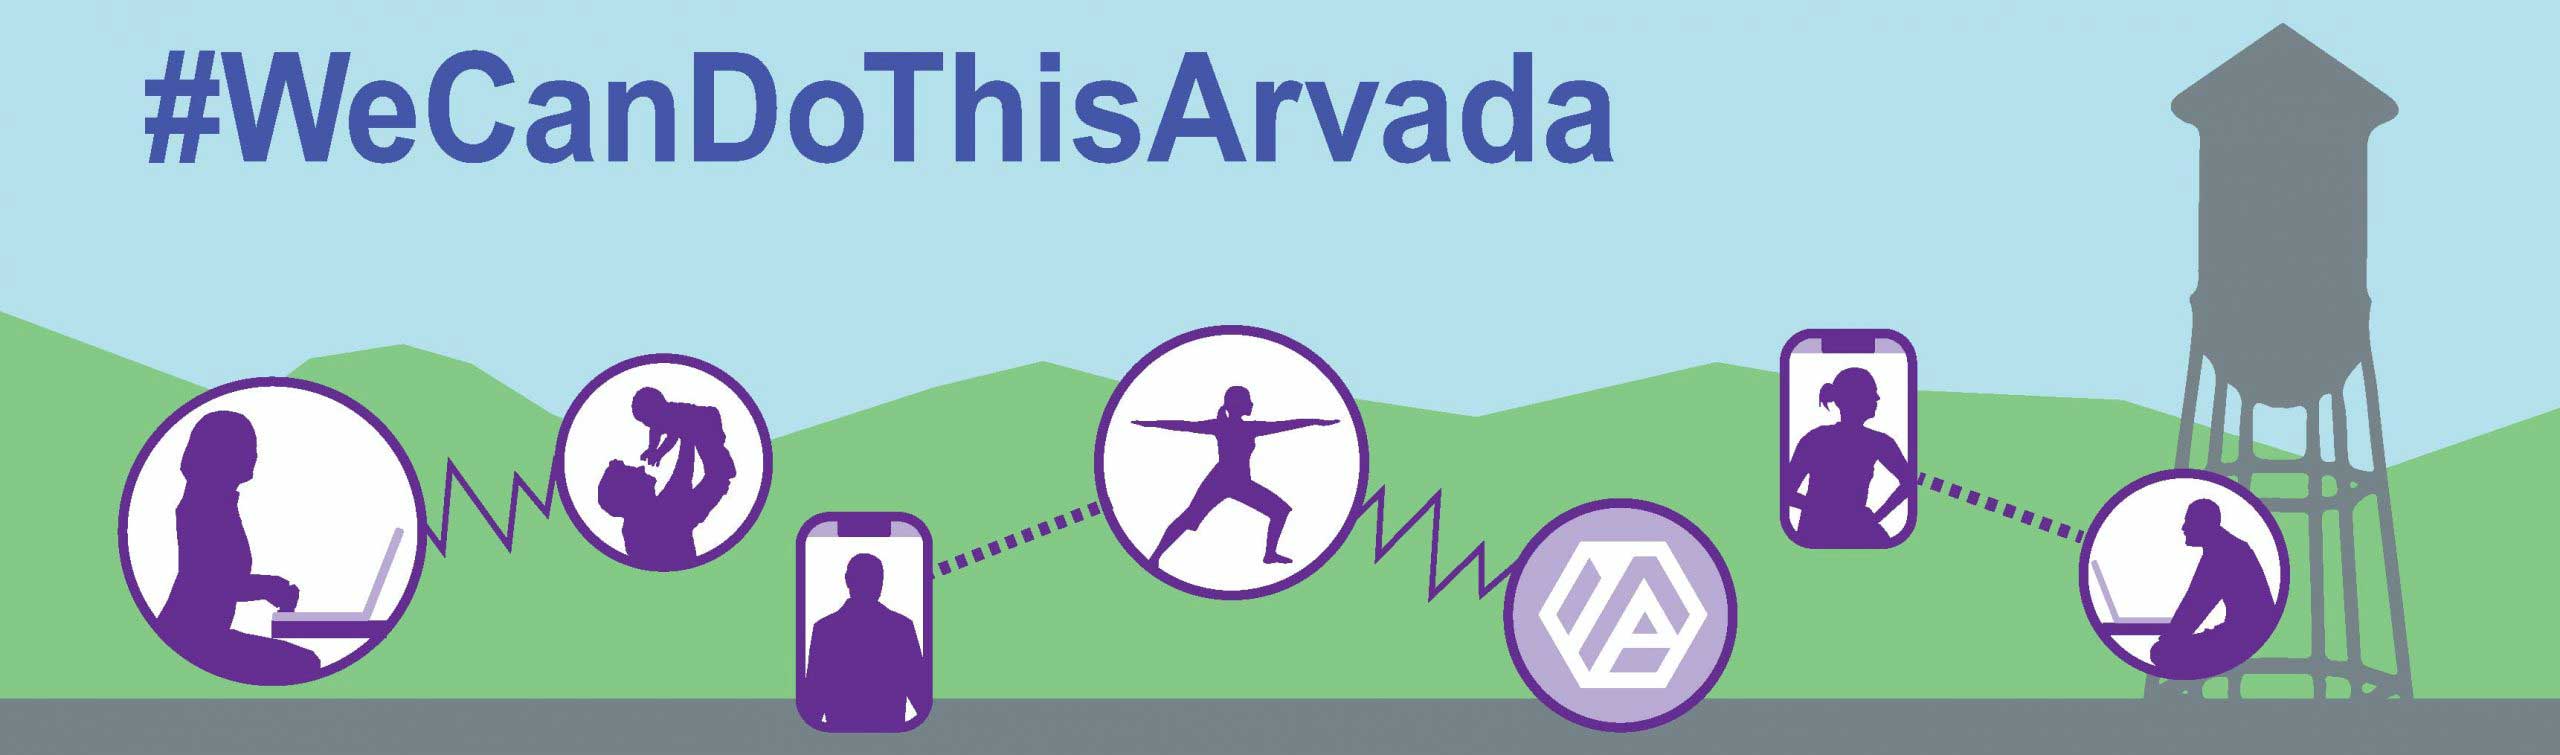 # We can do this Arvada